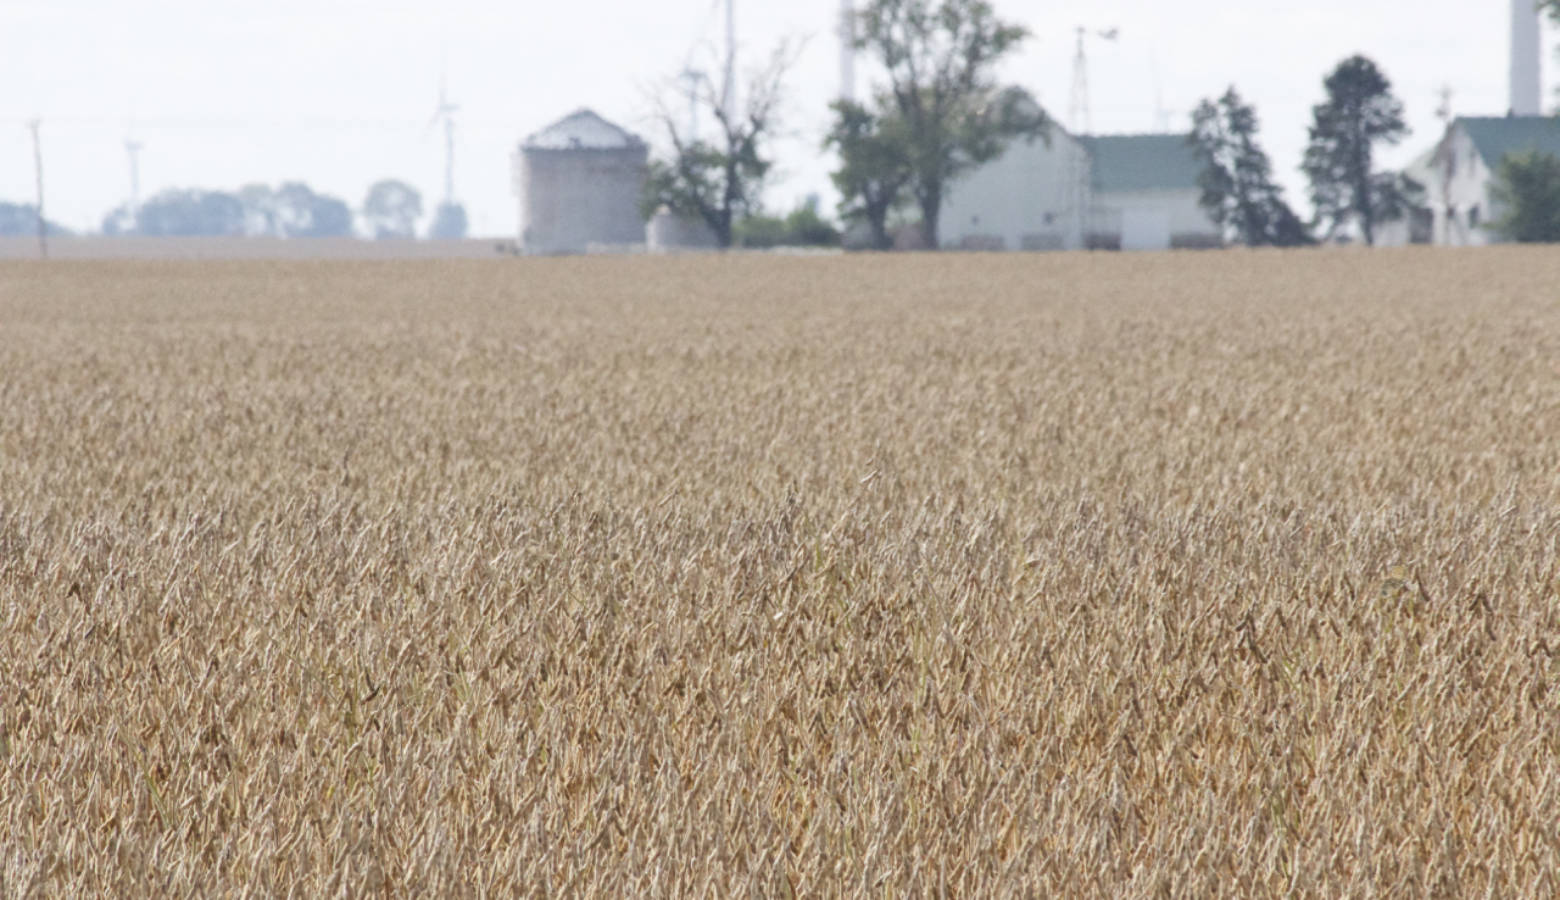 Soybeans awaited harvest in this White County field in early October. (Annie Ropeik/IPB News)